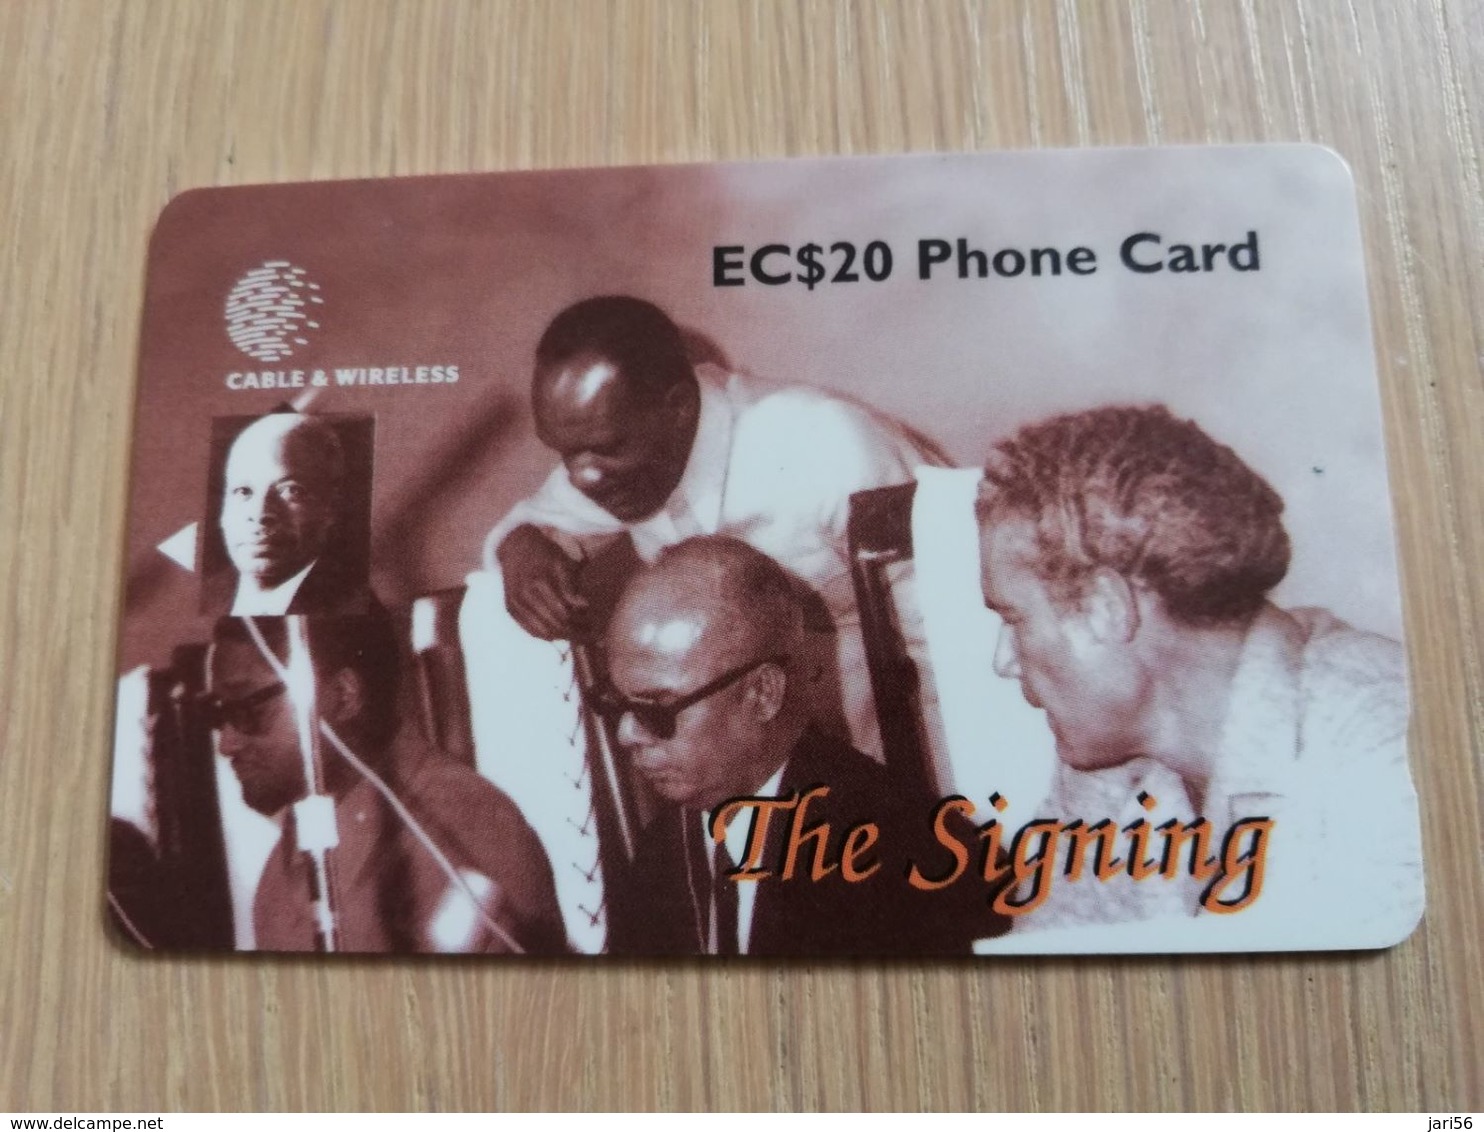 ST LUCIA    $ 20   CABLE & WIRELESS  STL-254B  254CSLB     THE SIGNING   Fine Used Card ** 2449** - St. Lucia